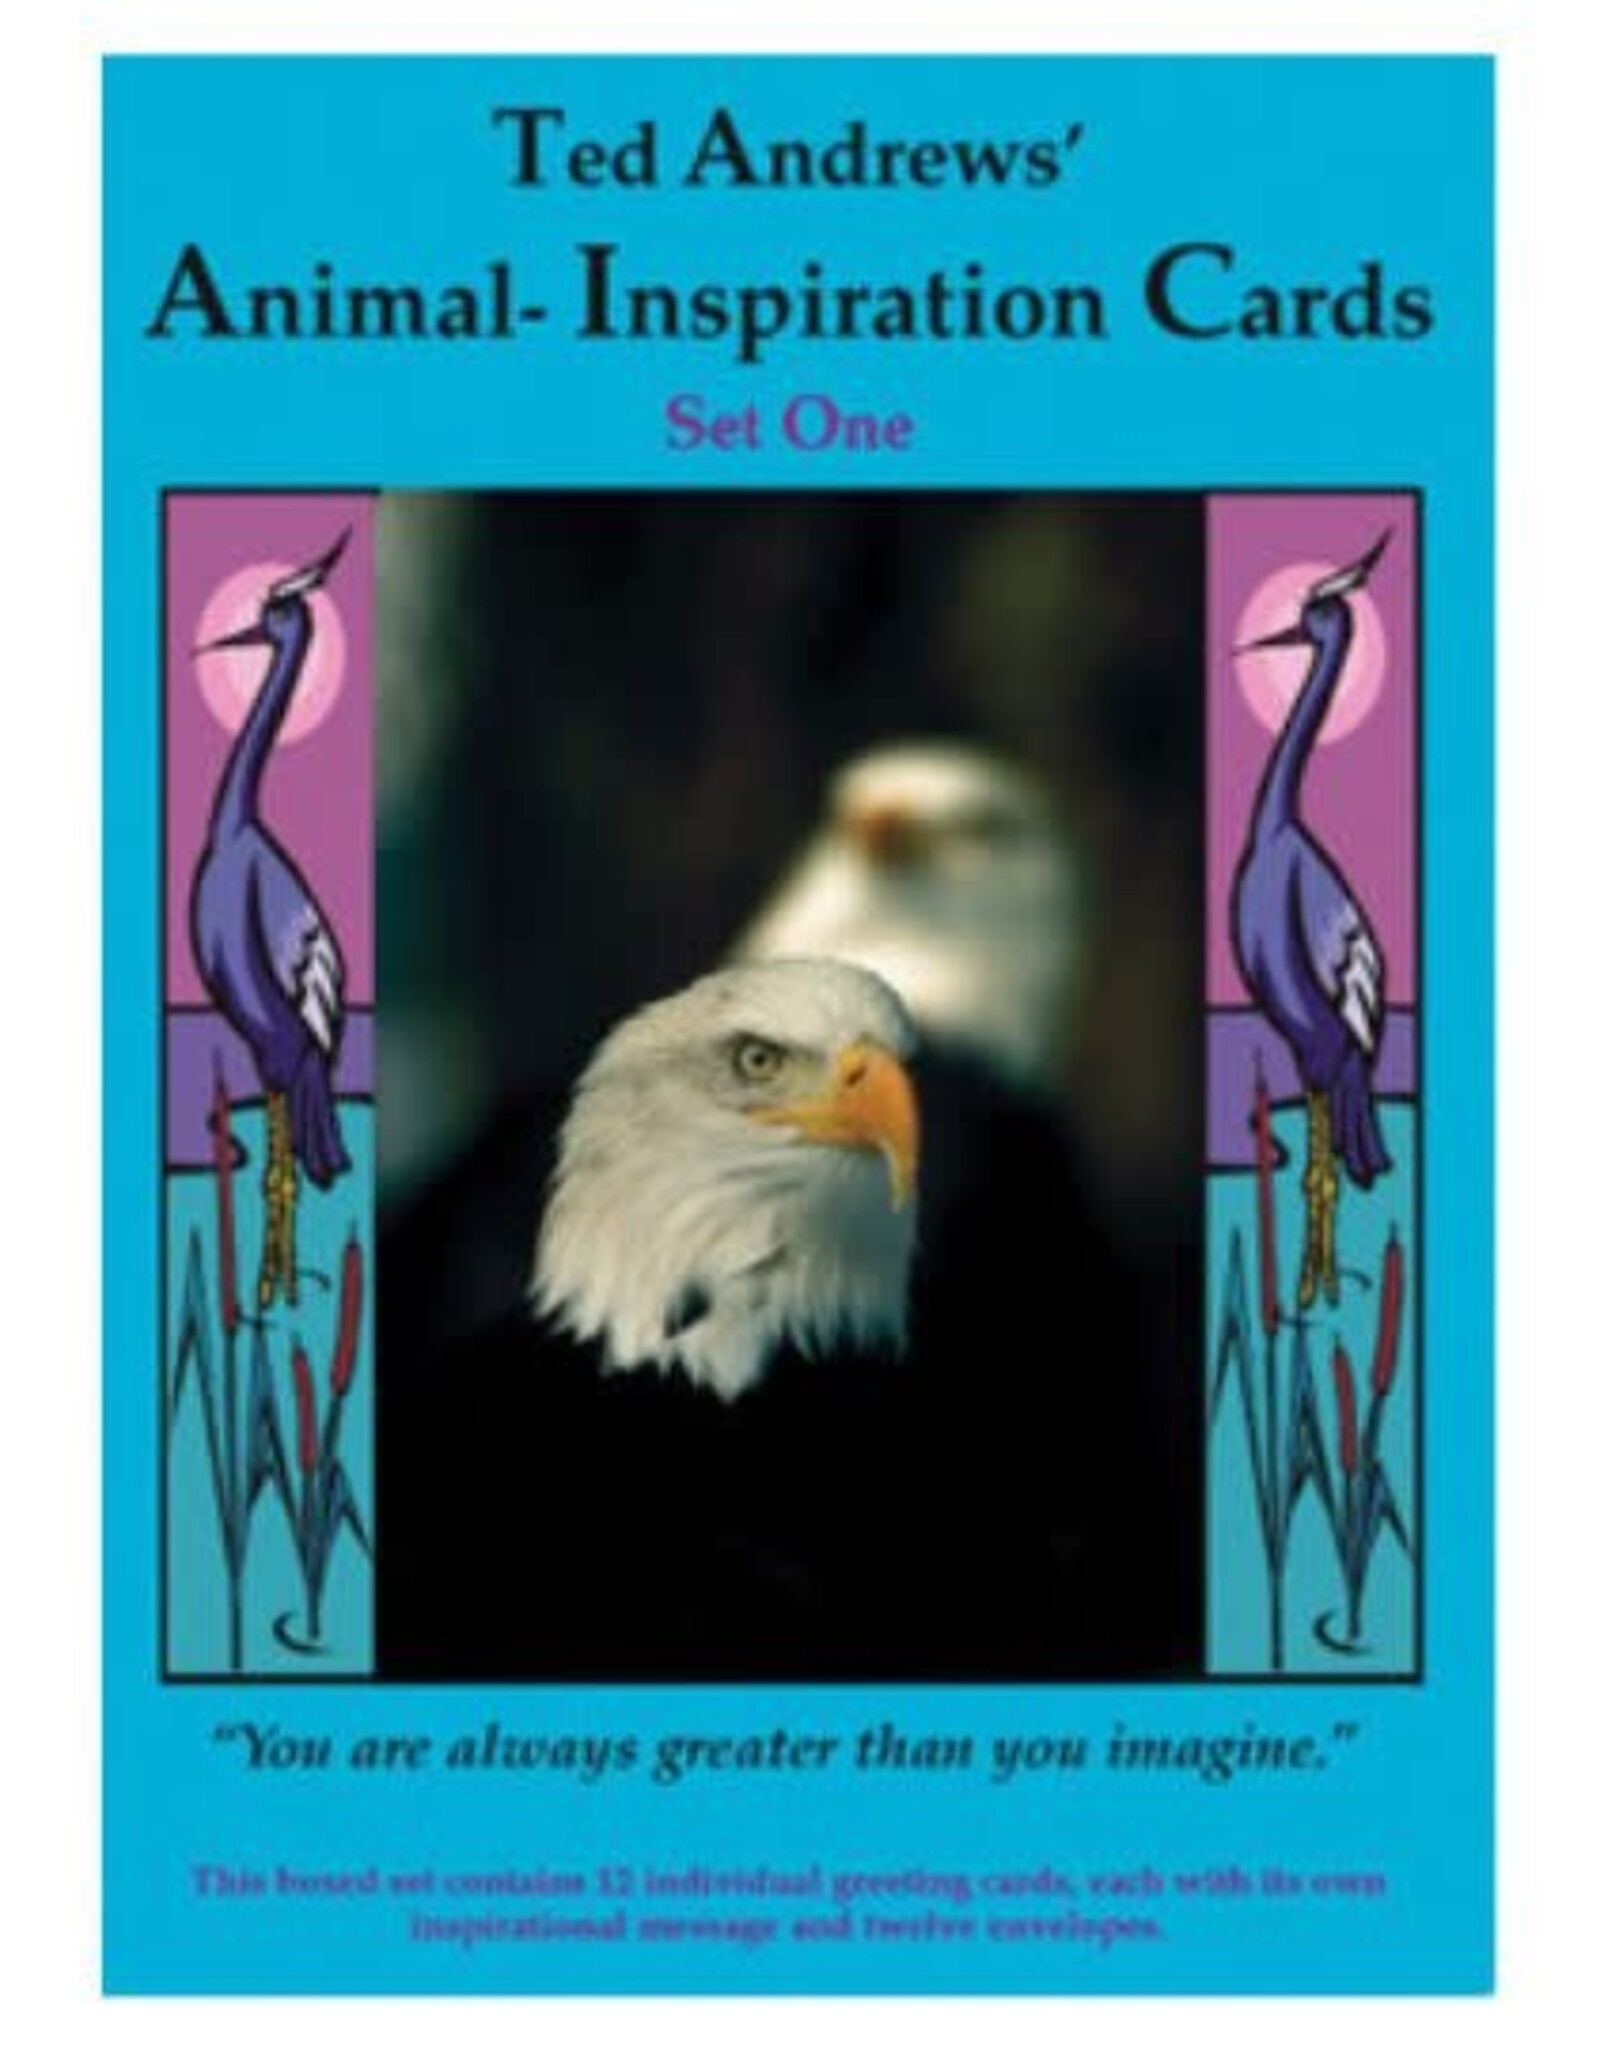 Ted Andrews Animal-Inspiration Greeting Card Set by Ted Andrews